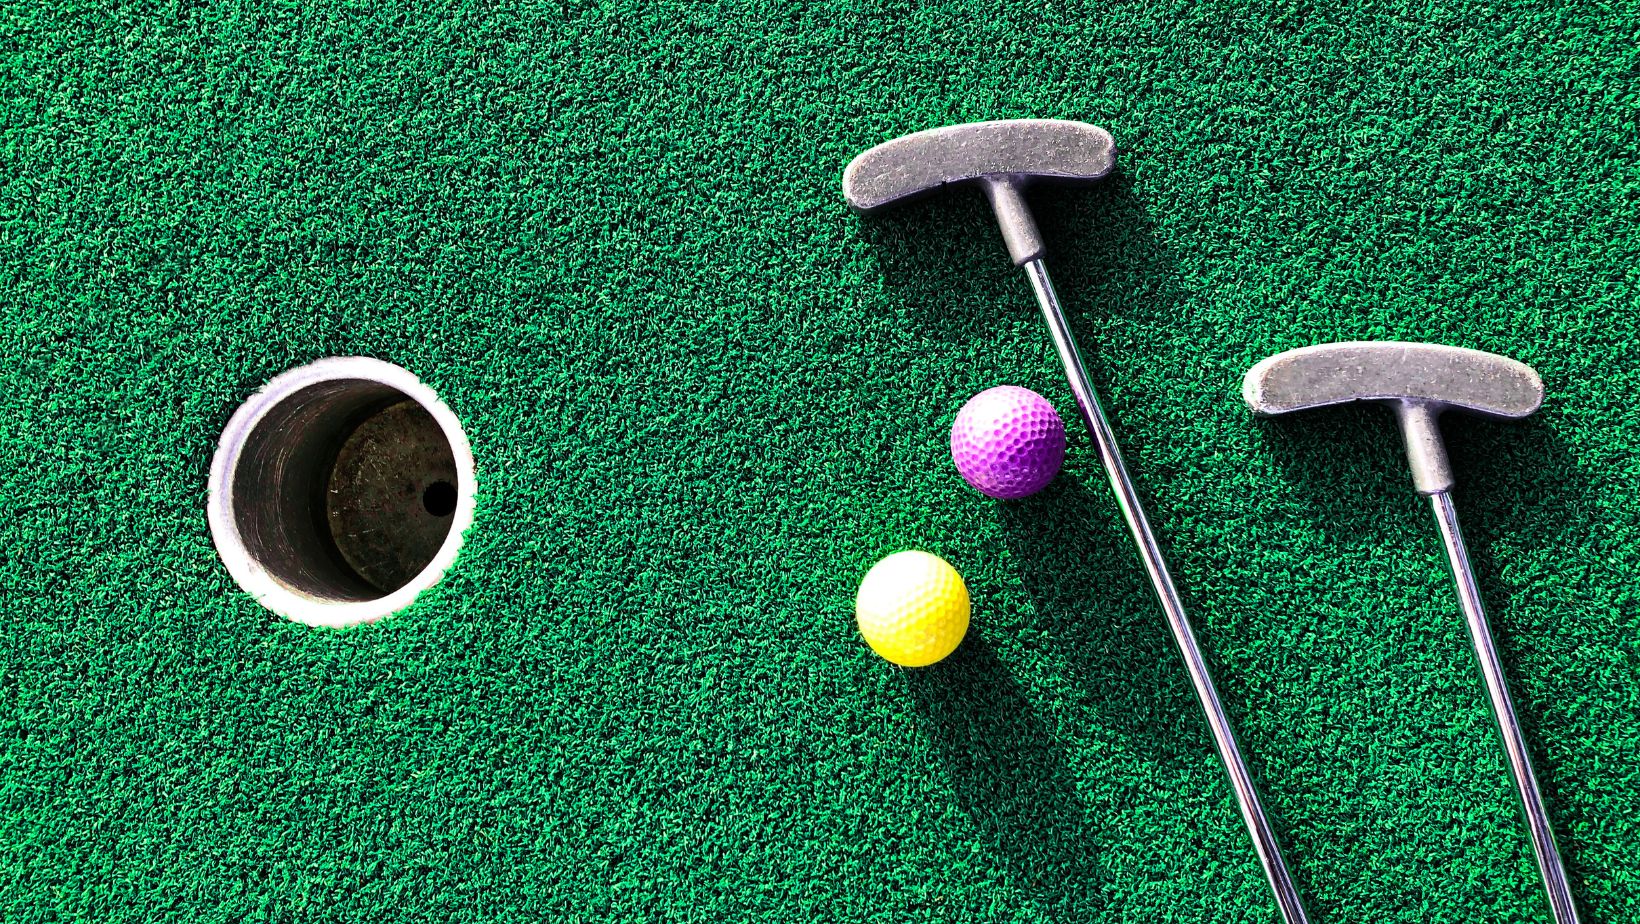 Elevate Your Golf Simulator Experience with Hitting Mats and Turf Options